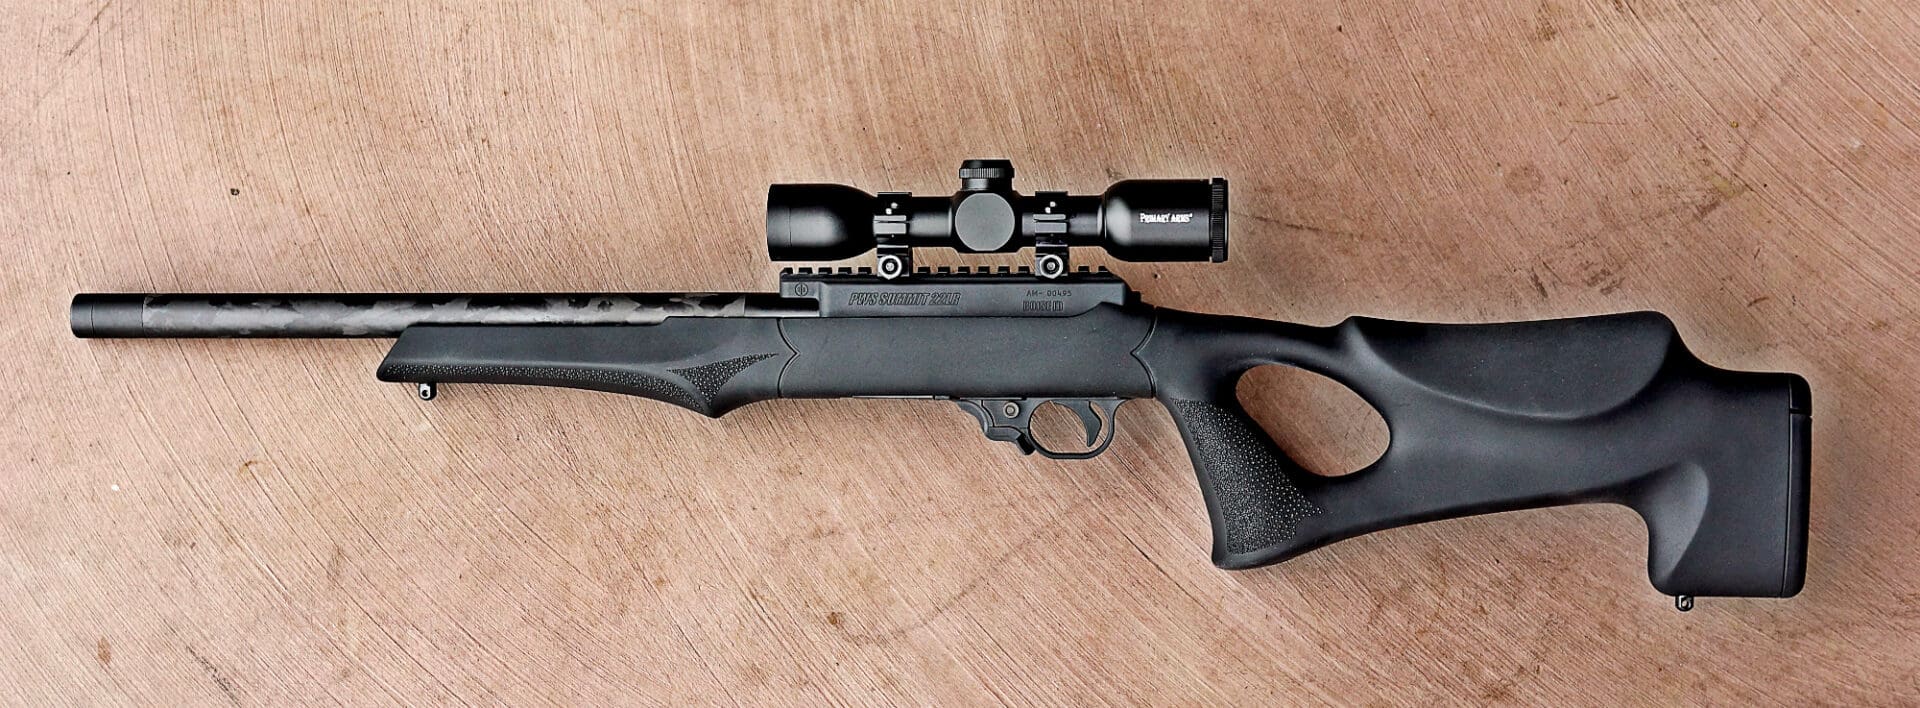 Related image of Hogue Overmolded Tactical Thumbhole Stock Released For The...